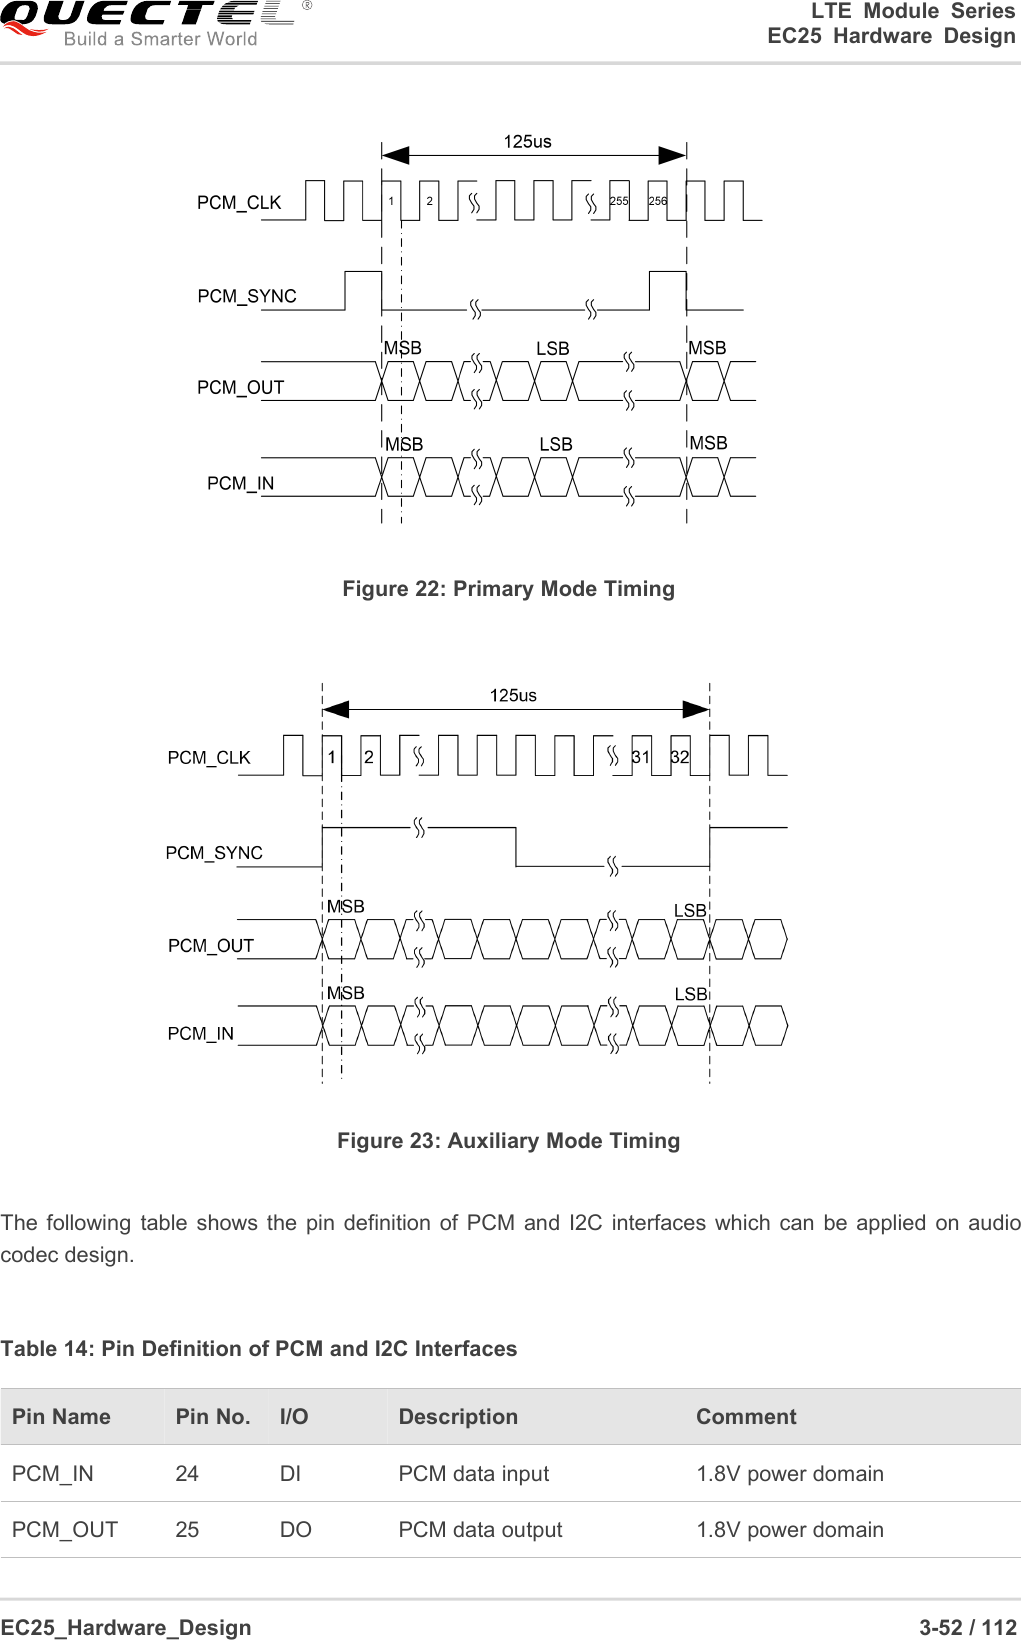 LTE Module SeriesEC25 Hardware DesignEC25_Hardware_Design 3-52 / 112Figure 22: Primary Mode TimingFigure 23: Auxiliary Mode TimingThe following table shows the pin definition of PCM and I2C interfaces which can be applied on audiocodec design.Table 14: Pin Definition of PCM and I2C InterfacesPin NamePin No.I/ODescriptionCommentPCM_IN24DIPCM data input1.8V power domainPCM_OUT25DOPCM data output1.8V power domain